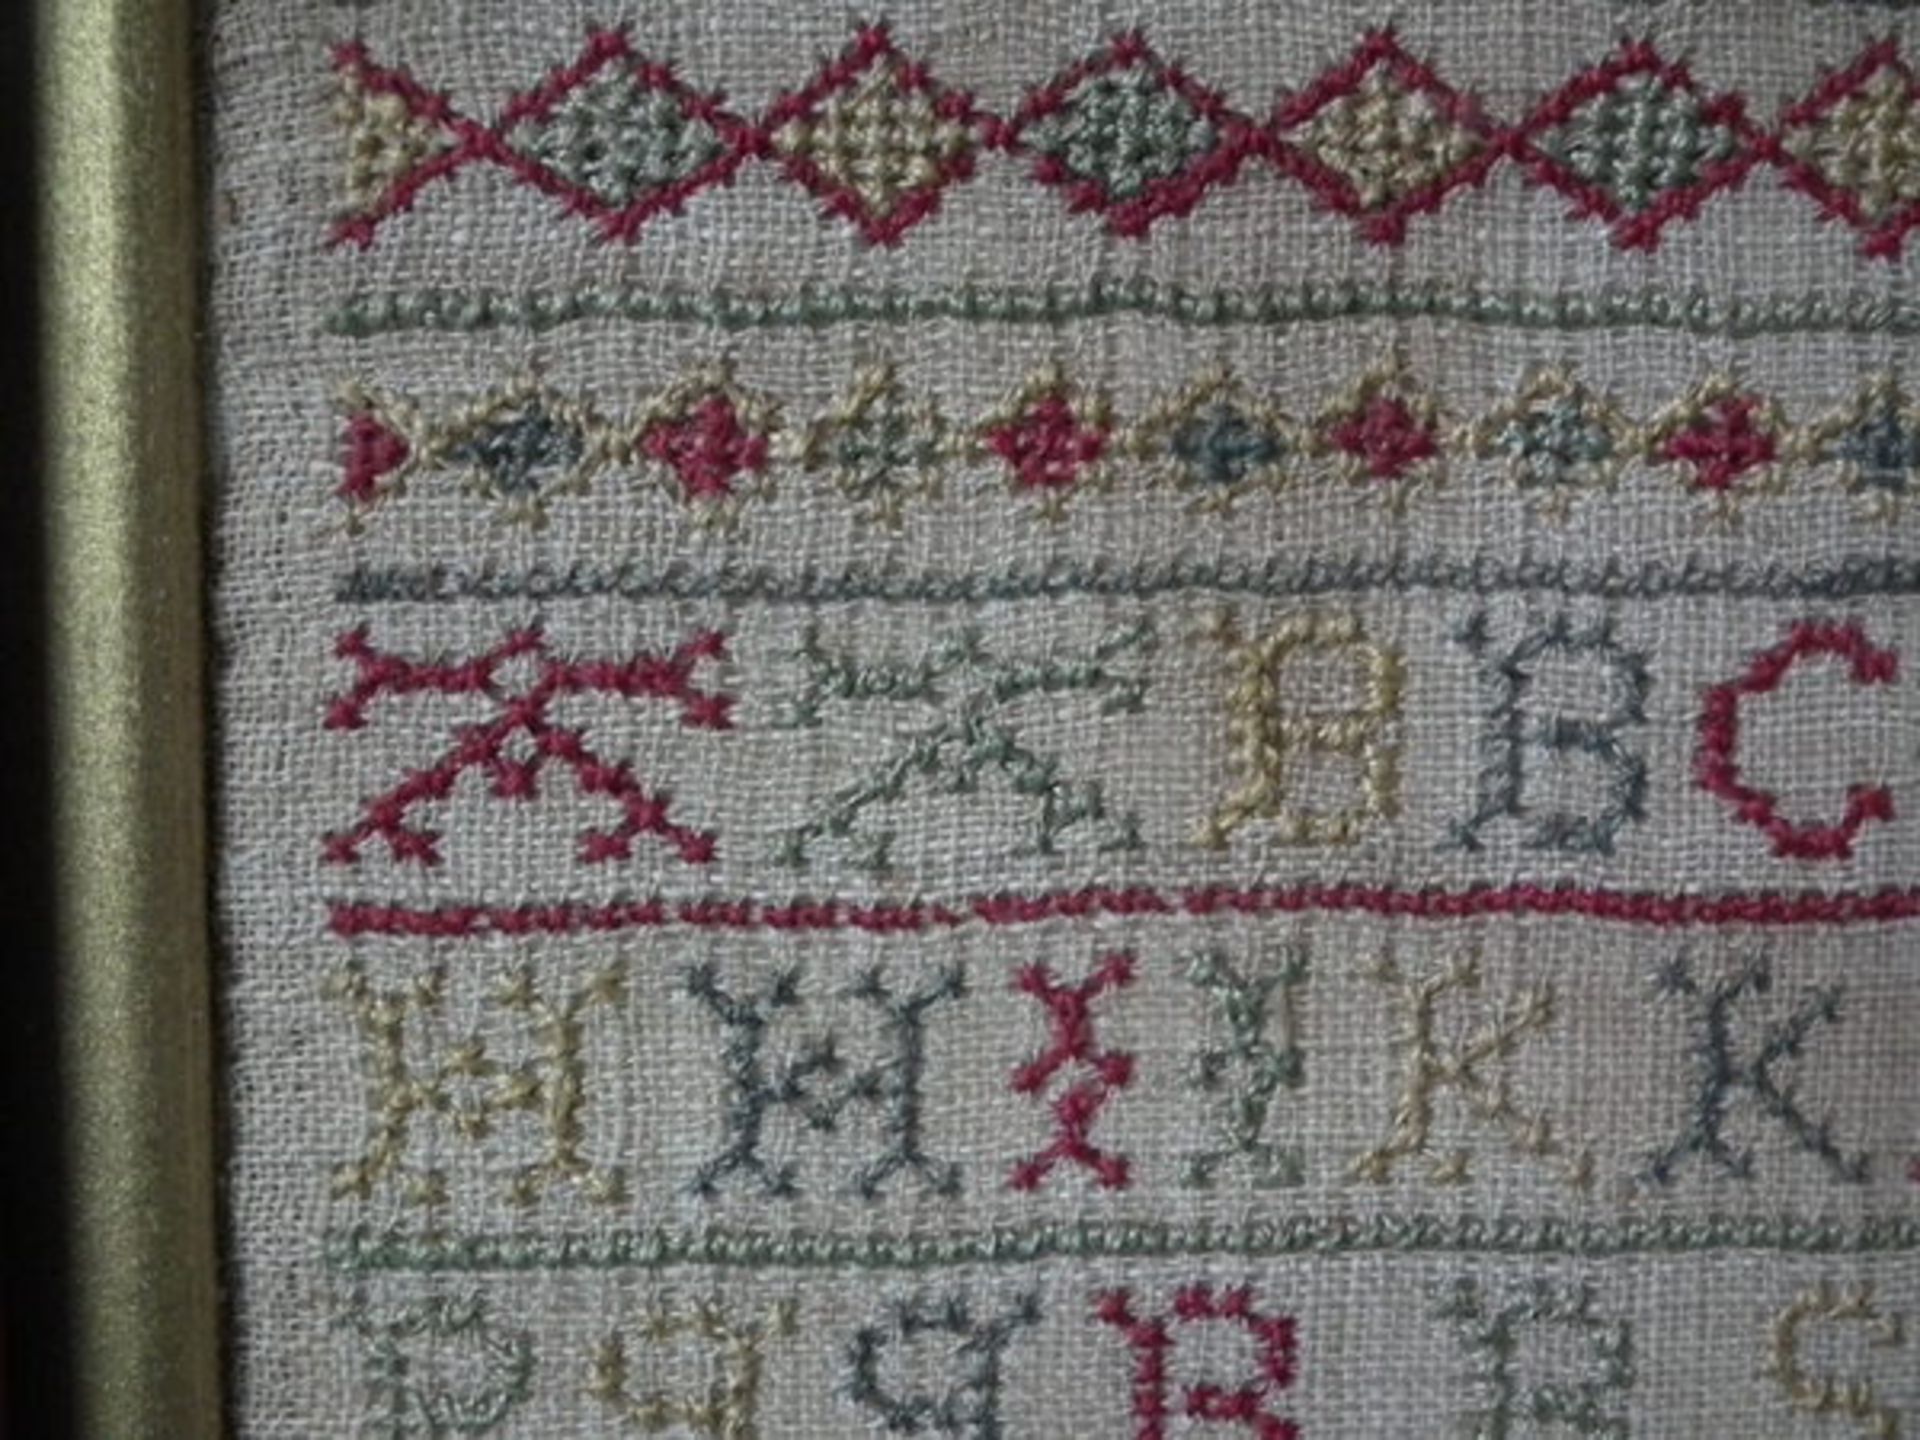 Needlework Band Sampler dated 1724 by Ann Wooding - FREE UK DELIVERY - Image 12 of 20